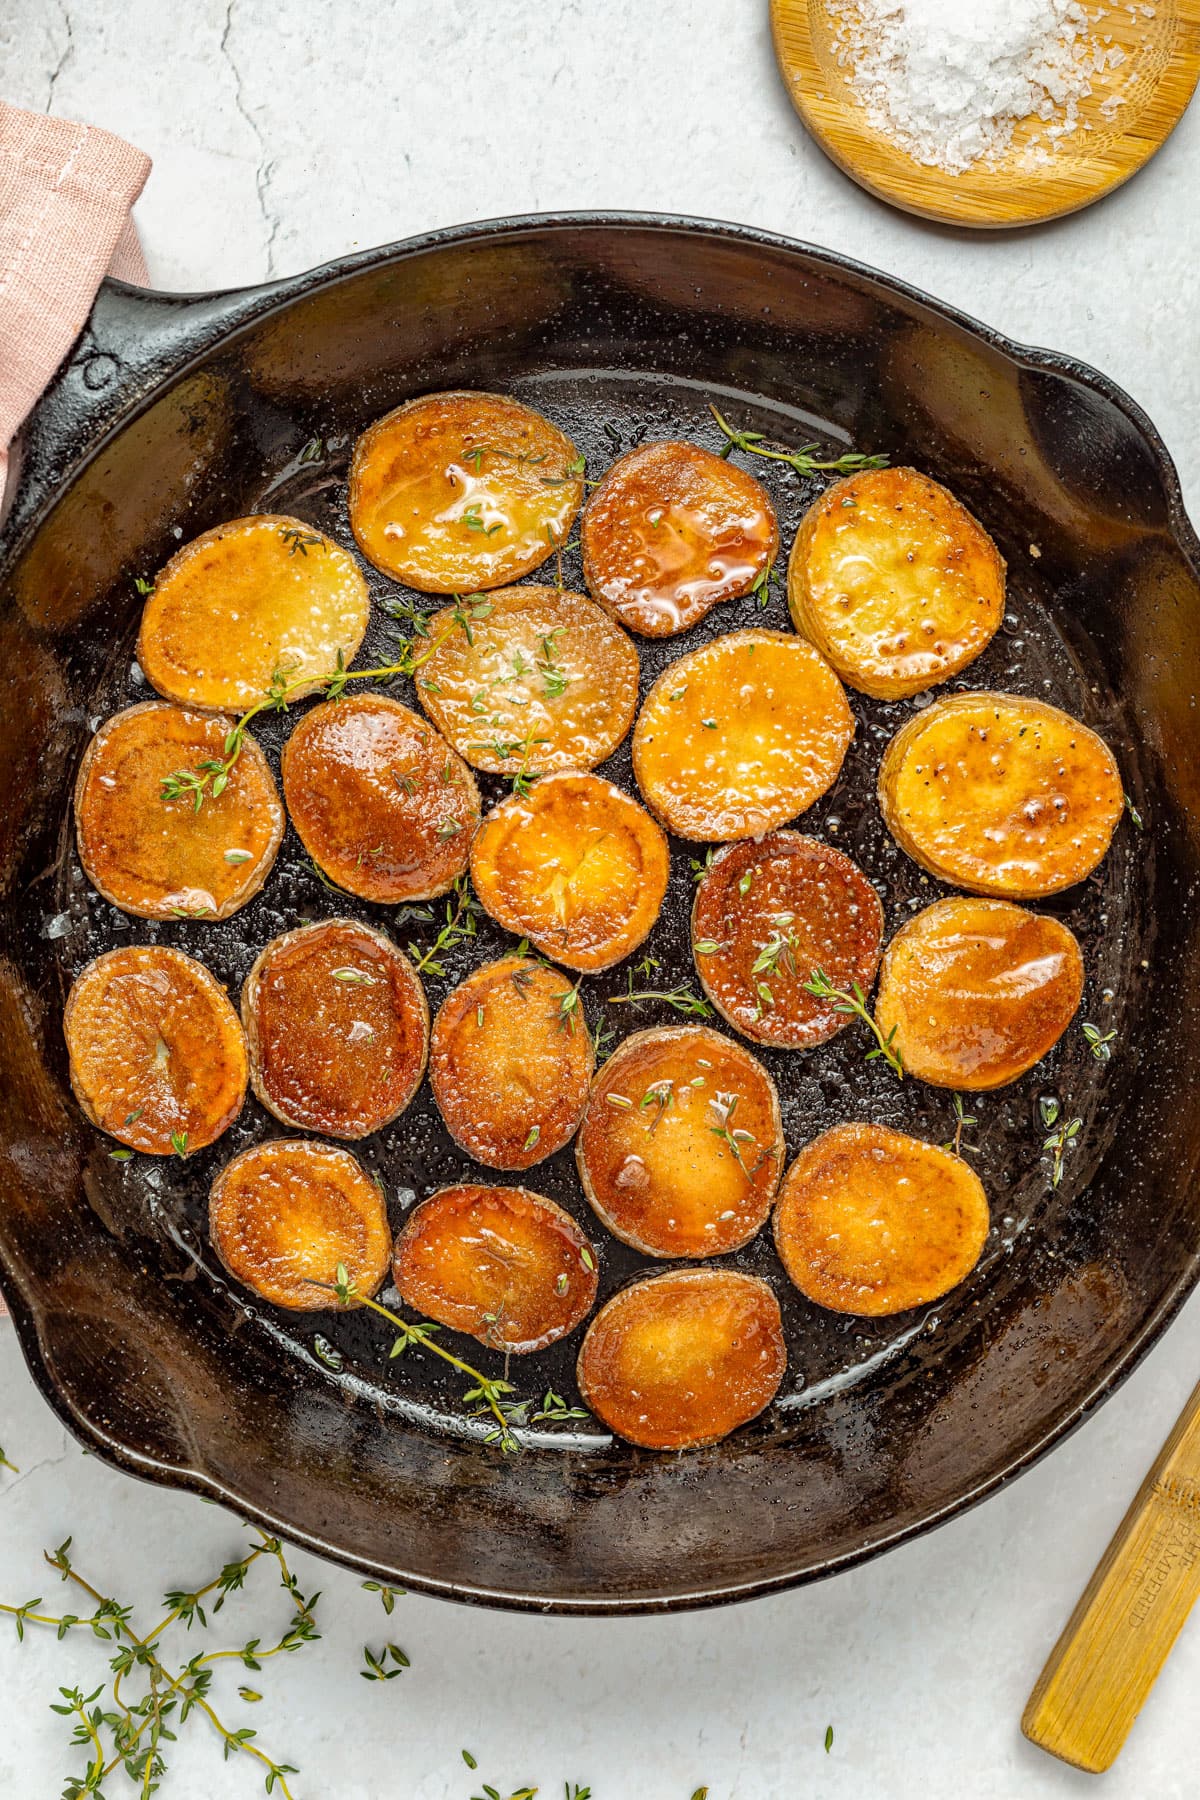 Top-down view of pan fried potatoes in a single layer in a large black cast iron skillet on a marble countertop.